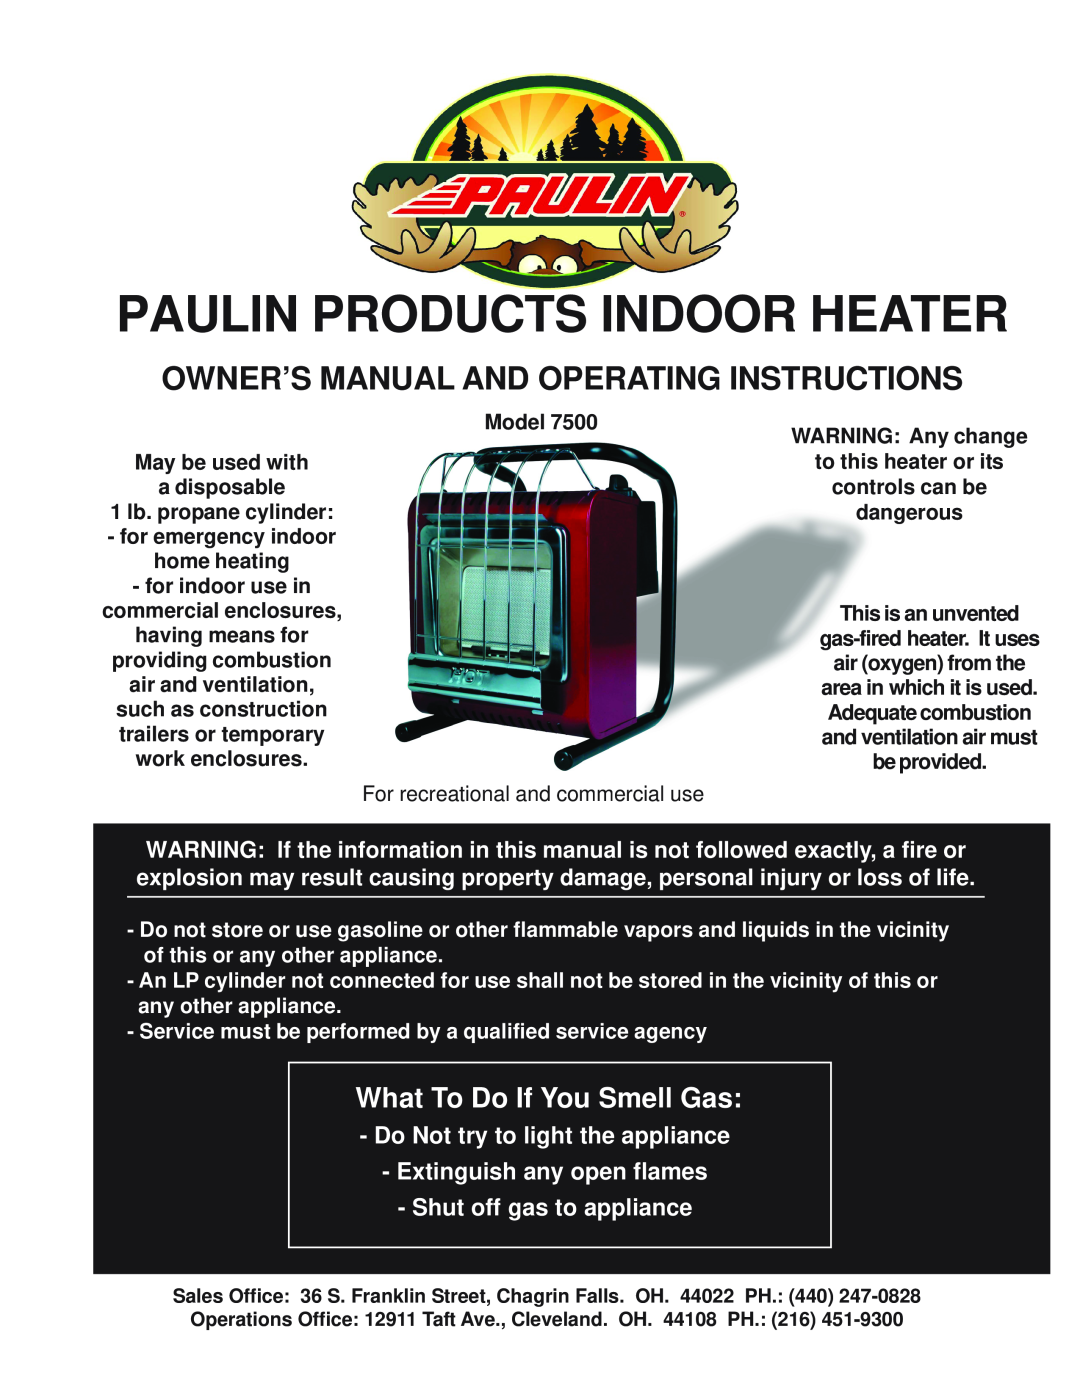 Gas-Fired Products 7500 owner manual Paulin Products Indoor Heater, What To Do If You Smell Gas, Shut off gas to appliance 